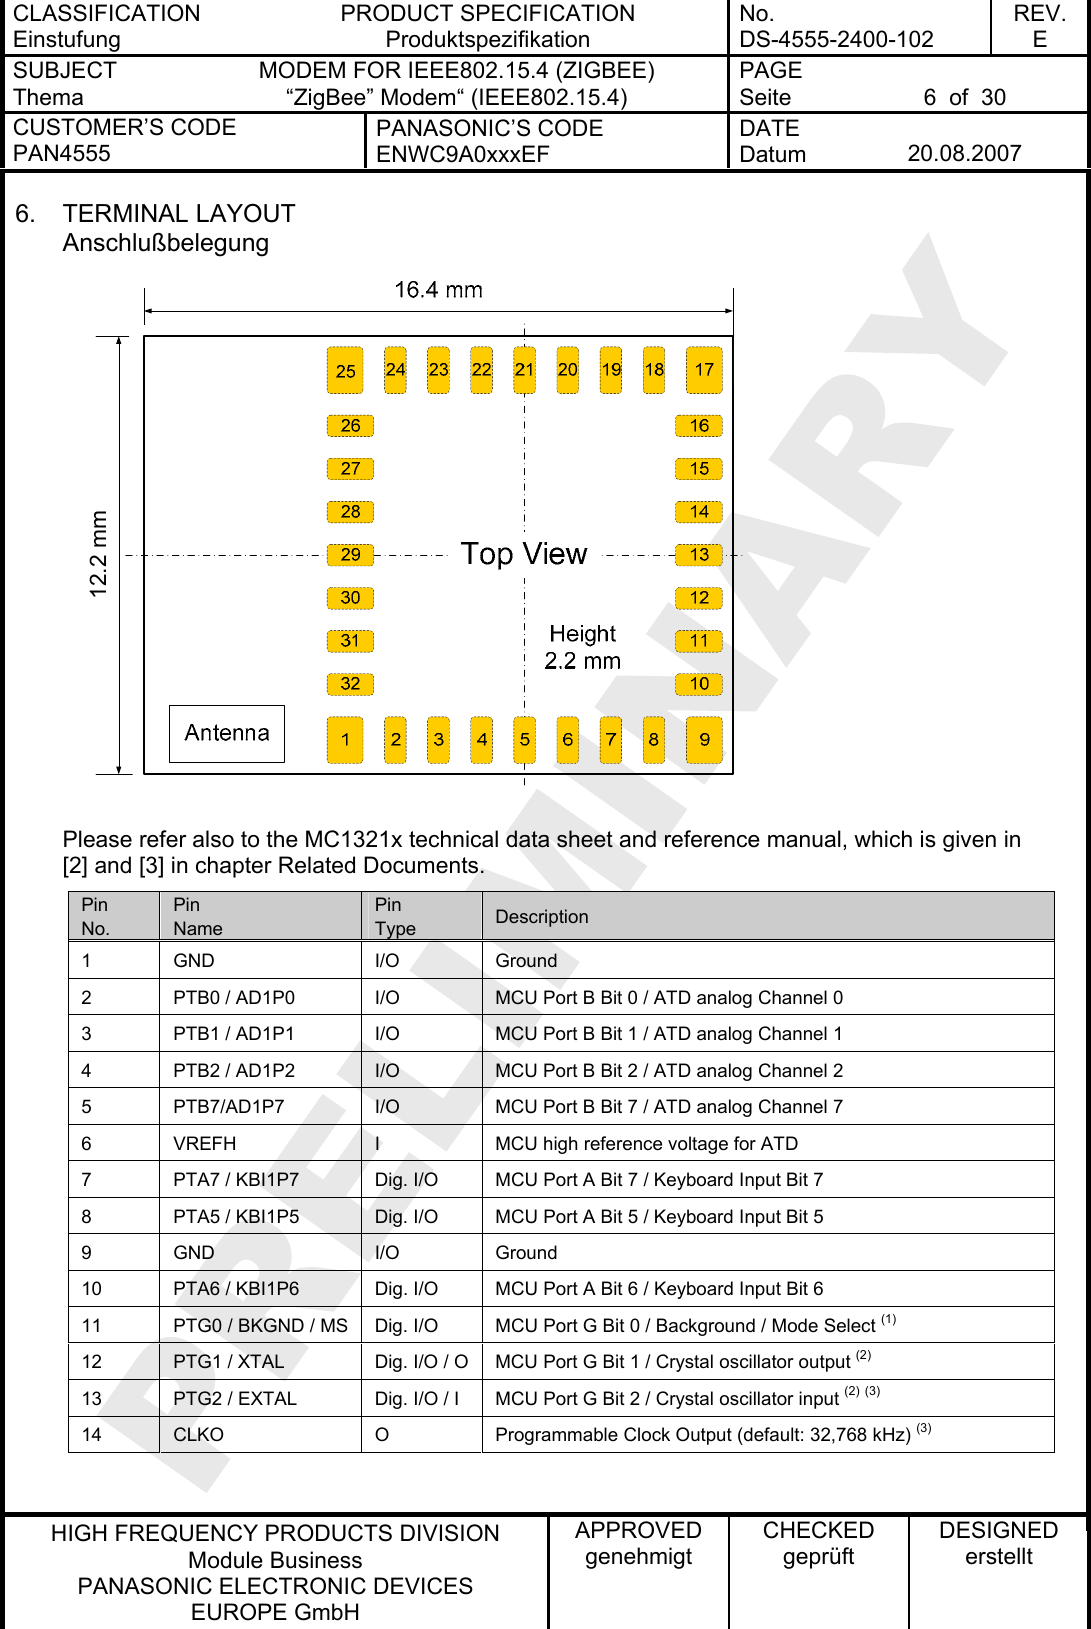 CLASSIFICATION Einstufung PRODUCT SPECIFICATION Produktspezifikation No. DS-4555-2400-102 REV. E SUBJECT Thema MODEM FOR IEEE802.15.4 (ZIGBEE) “ZigBee” Modem“ (IEEE802.15.4) PAGE Seite  6  of  30 CUSTOMER’S CODE PAN4555 PANASONIC’S CODE ENWC9A0xxxEF DATE Datum  20.08.2007   HIGH FREQUENCY PRODUCTS DIVISION Module Business PANASONIC ELECTRONIC DEVICES  EUROPE GmbH APPROVED genehmigt CHECKED geprüft DESIGNED erstellt 6. TERMINAL LAYOUT Anschlußbelegung  Please refer also to the MC1321x technical data sheet and reference manual, which is given in [2] and [3] in chapter Related Documents. 12.2 mmPin No. Pin Name Pin Type  Description 1 GND  I/O  Ground 2  PTB0 / AD1P0  I/O  MCU Port B Bit 0 / ATD analog Channel 0 3  PTB1 / AD1P1  I/O  MCU Port B Bit 1 / ATD analog Channel 1 4  PTB2 / AD1P2  I/O  MCU Port B Bit 2 / ATD analog Channel 2 5  PTB7/AD1P7  I/O  MCU Port B Bit 7 / ATD analog Channel 7 6  VREFH  I  MCU high reference voltage for ATD 7  PTA7 / KBI1P7  Dig. I/O  MCU Port A Bit 7 / Keyboard Input Bit 7 8  PTA5 / KBI1P5  Dig. I/O  MCU Port A Bit 5 / Keyboard Input Bit 5 9 GND  I/O  Ground 10  PTA6 / KBI1P6  Dig. I/O  MCU Port A Bit 6 / Keyboard Input Bit 6 11  PTG0 / BKGND / MS  Dig. I/O  MCU Port G Bit 0 / Background / Mode Select (1) 12  PTG1 / XTAL  Dig. I/O / O  MCU Port G Bit 1 / Crystal oscillator output (2) 13  PTG2 / EXTAL  Dig. I/O / I  MCU Port G Bit 2 / Crystal oscillator input (2) (3)14  CLKO  O  Programmable Clock Output (default: 32,768 kHz) (3)  